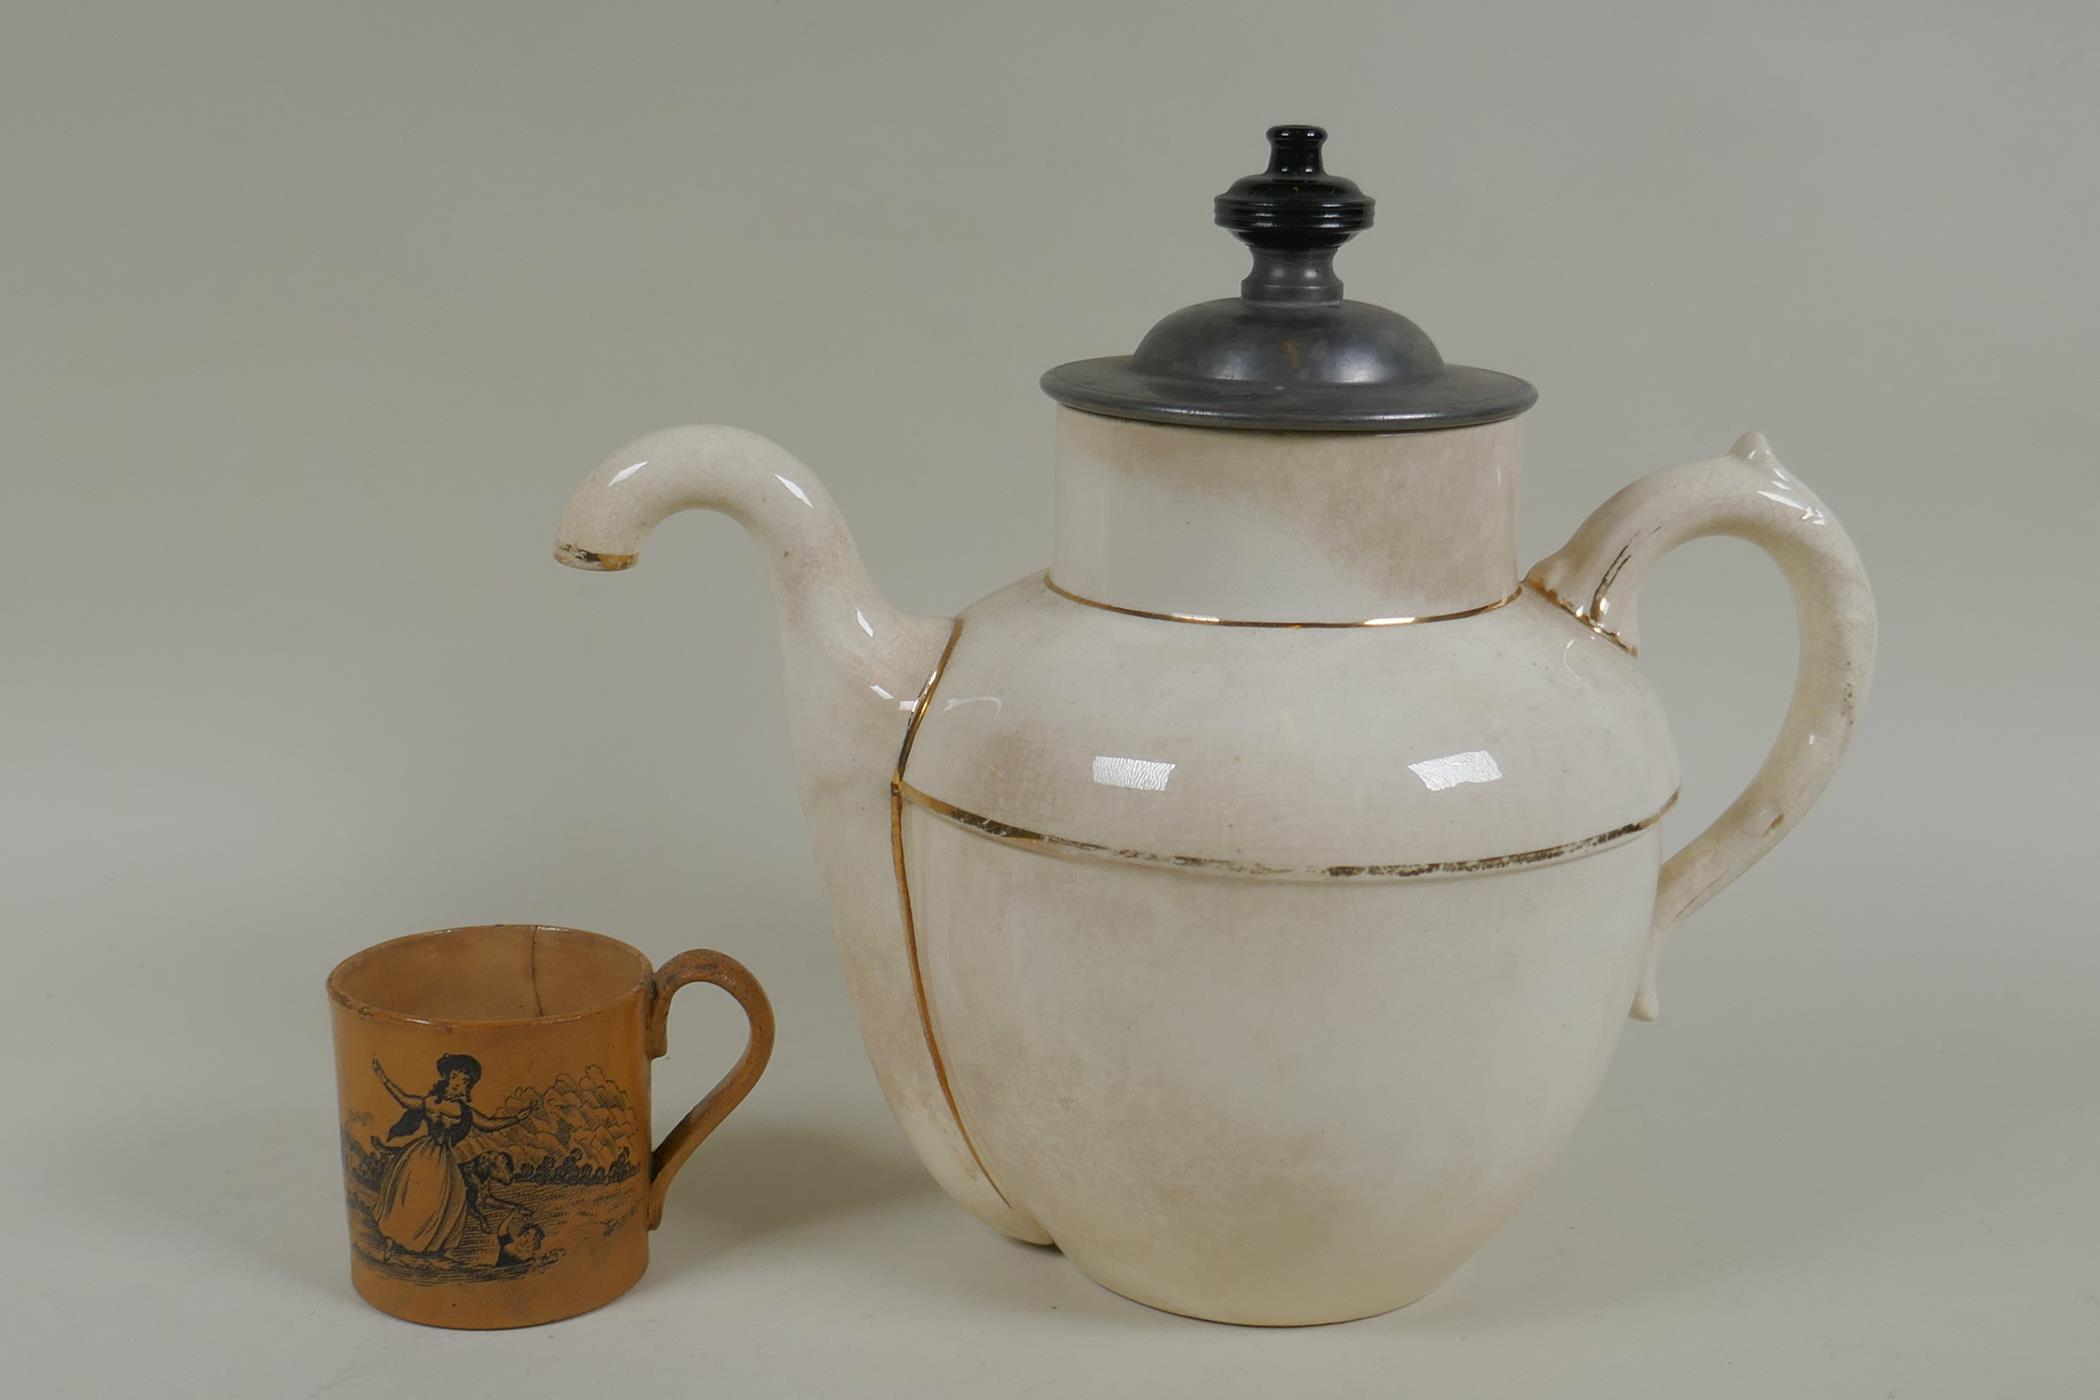 A C19th Burslem Royal patent self pouring teapot, an early stoneware mug with transfer decoration of